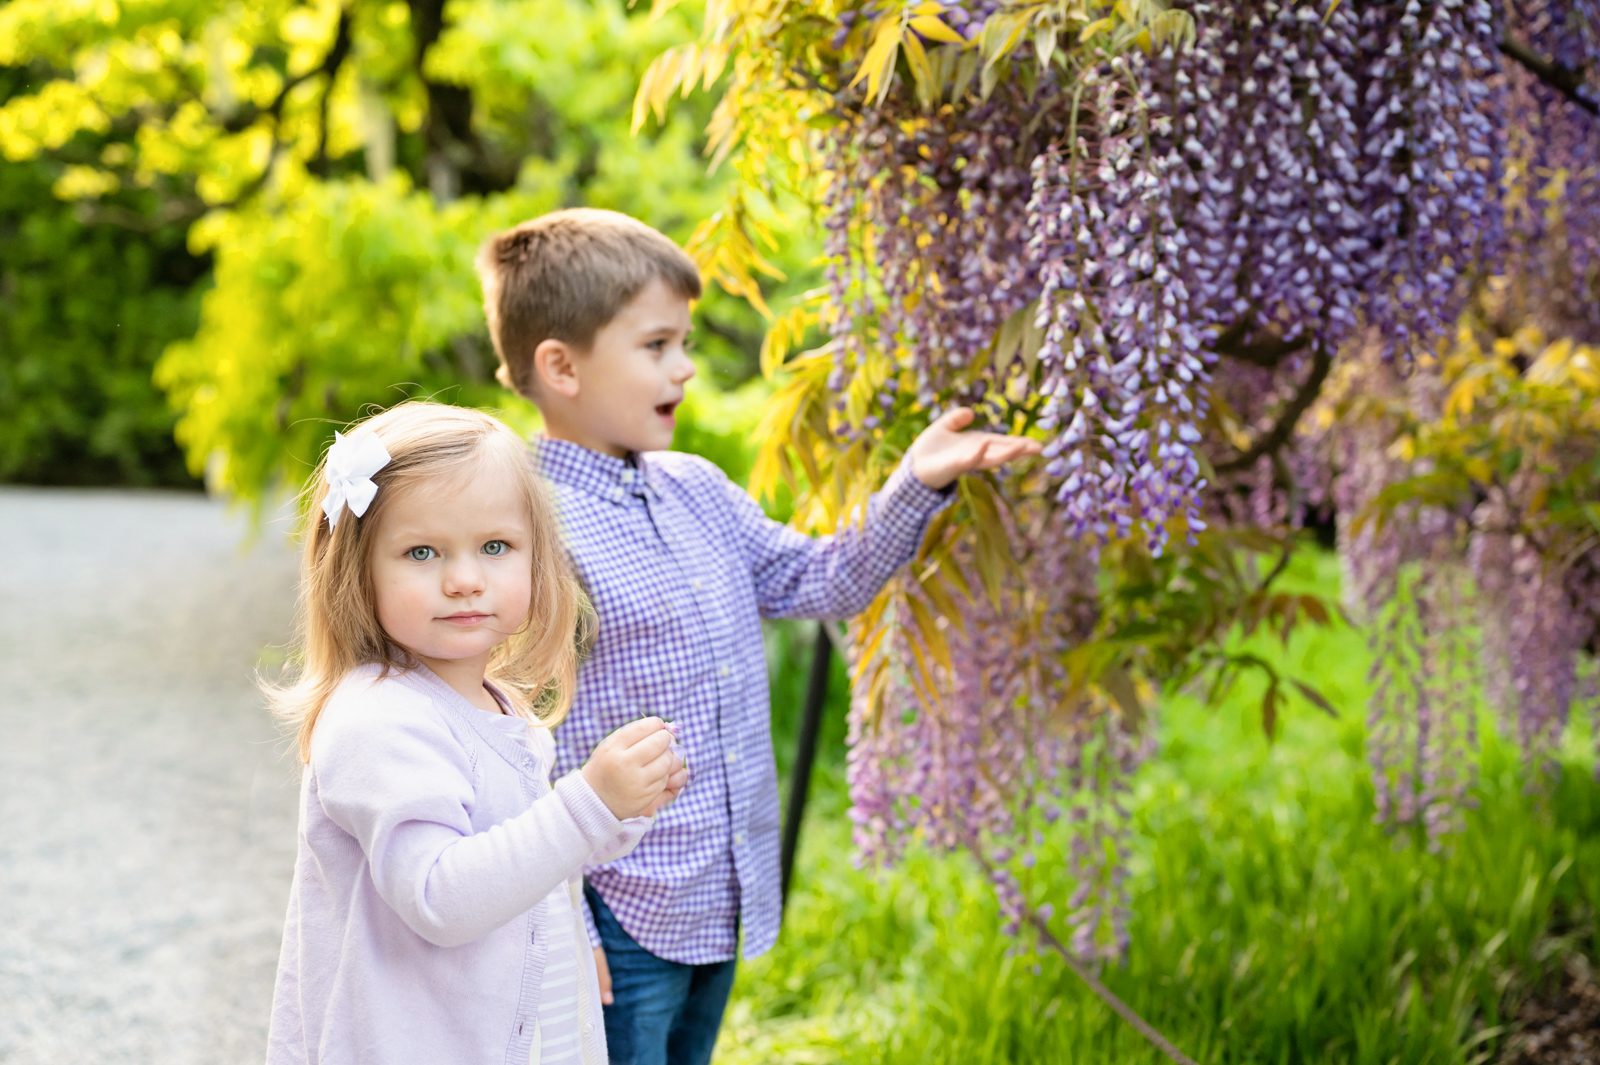 a young girl looking directly at the camera while her older brother stands behind her and reaches out to touch a wisteria flower in bloom